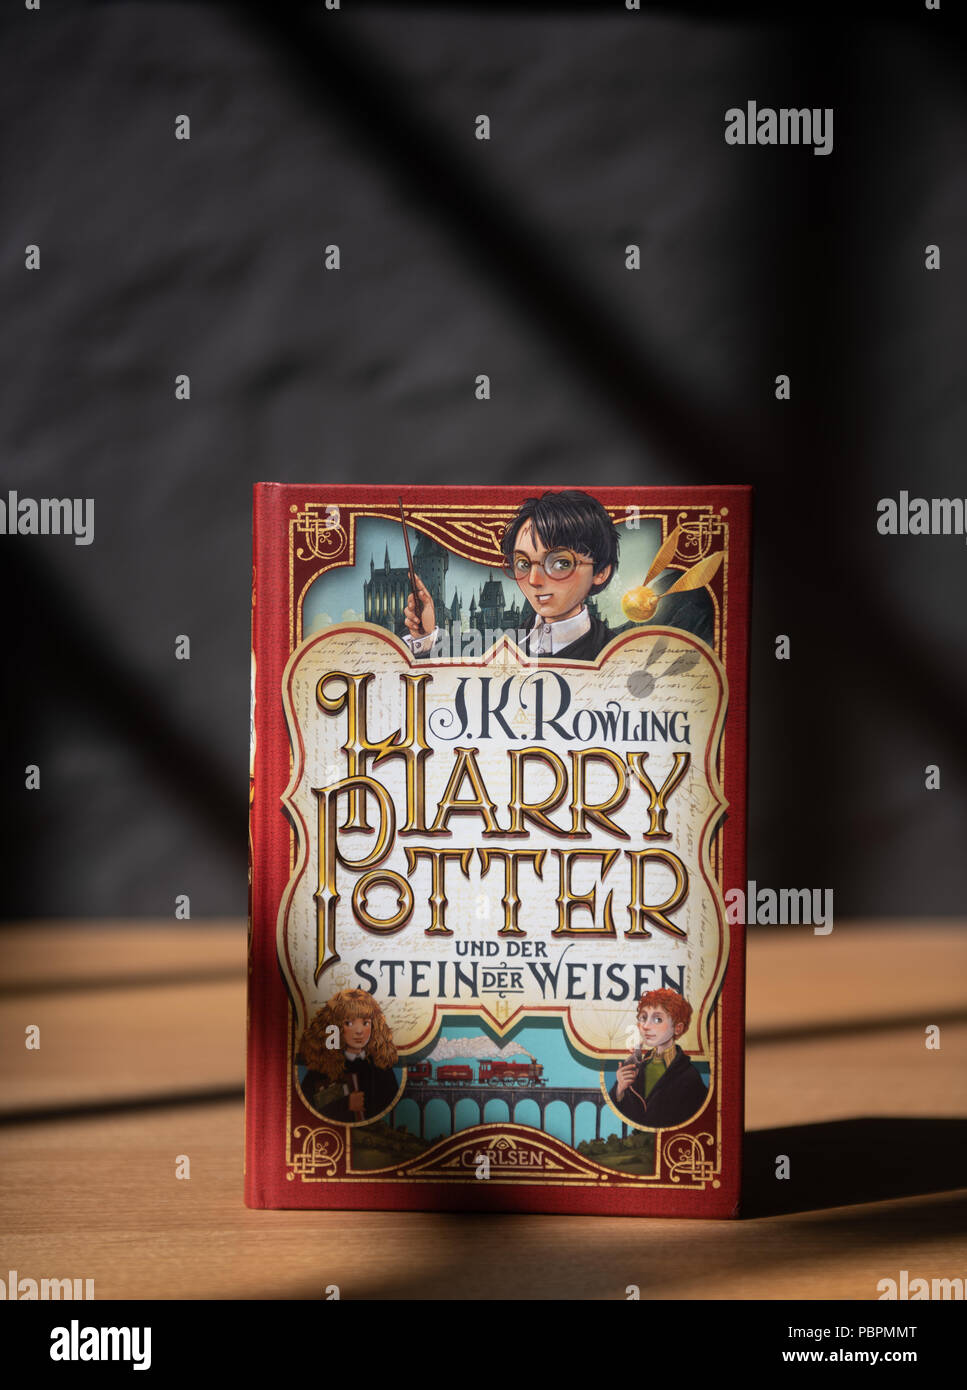 Hamburg Germany 26th July 18 The New Edition Of The First Harry Potter Volume Harry Potter